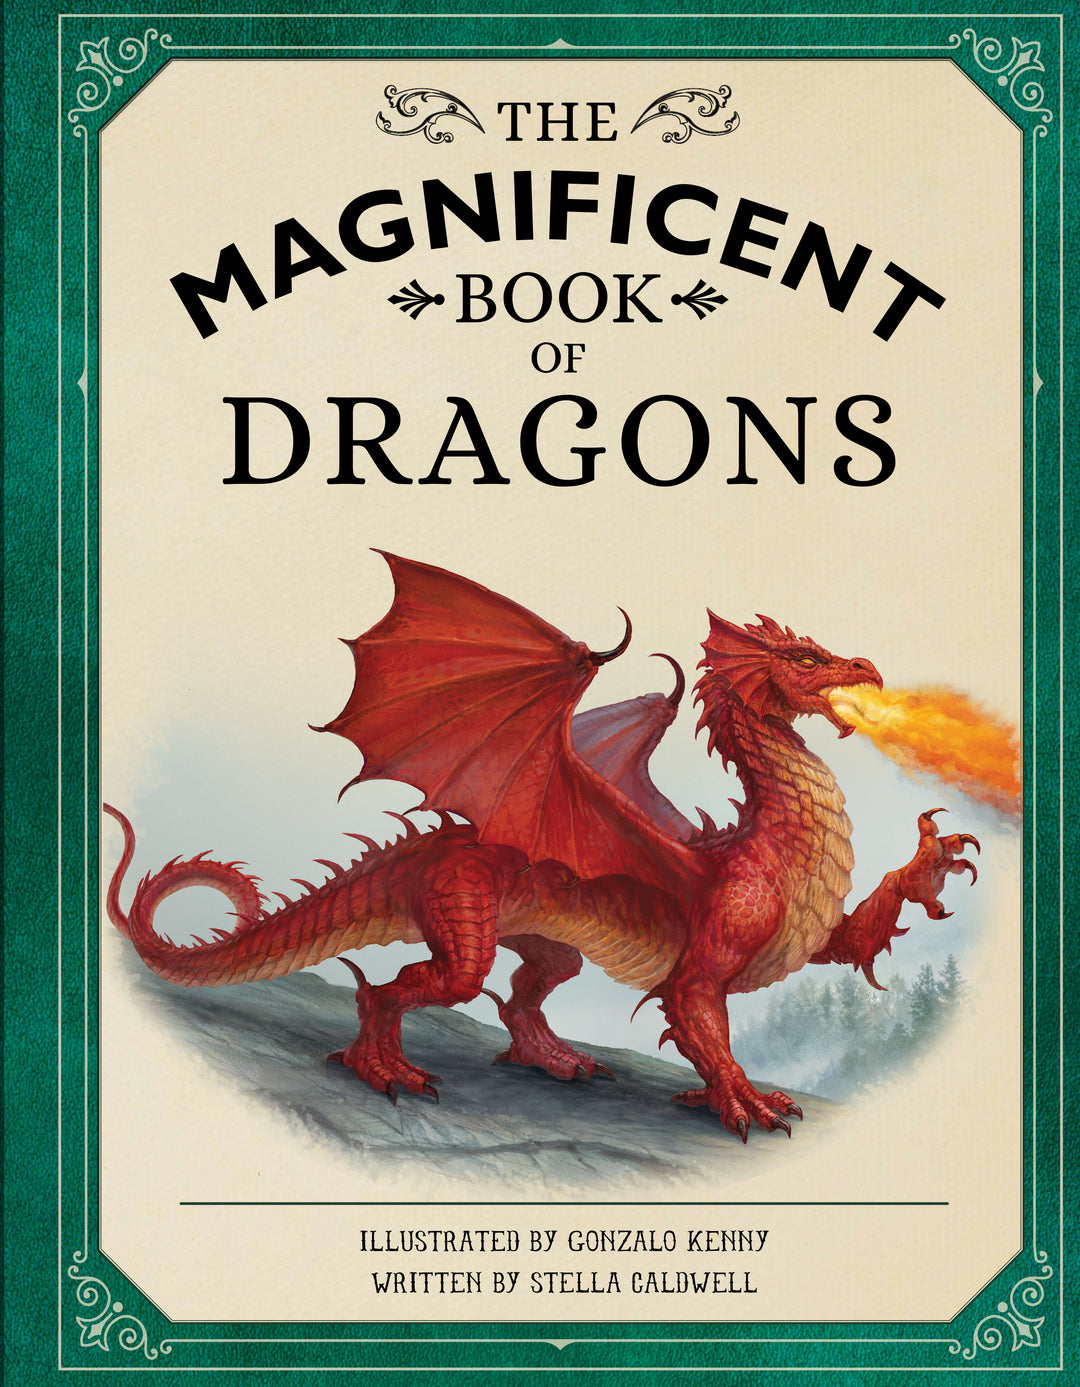 MAGNIFICENT BOOK OF DRAGONS